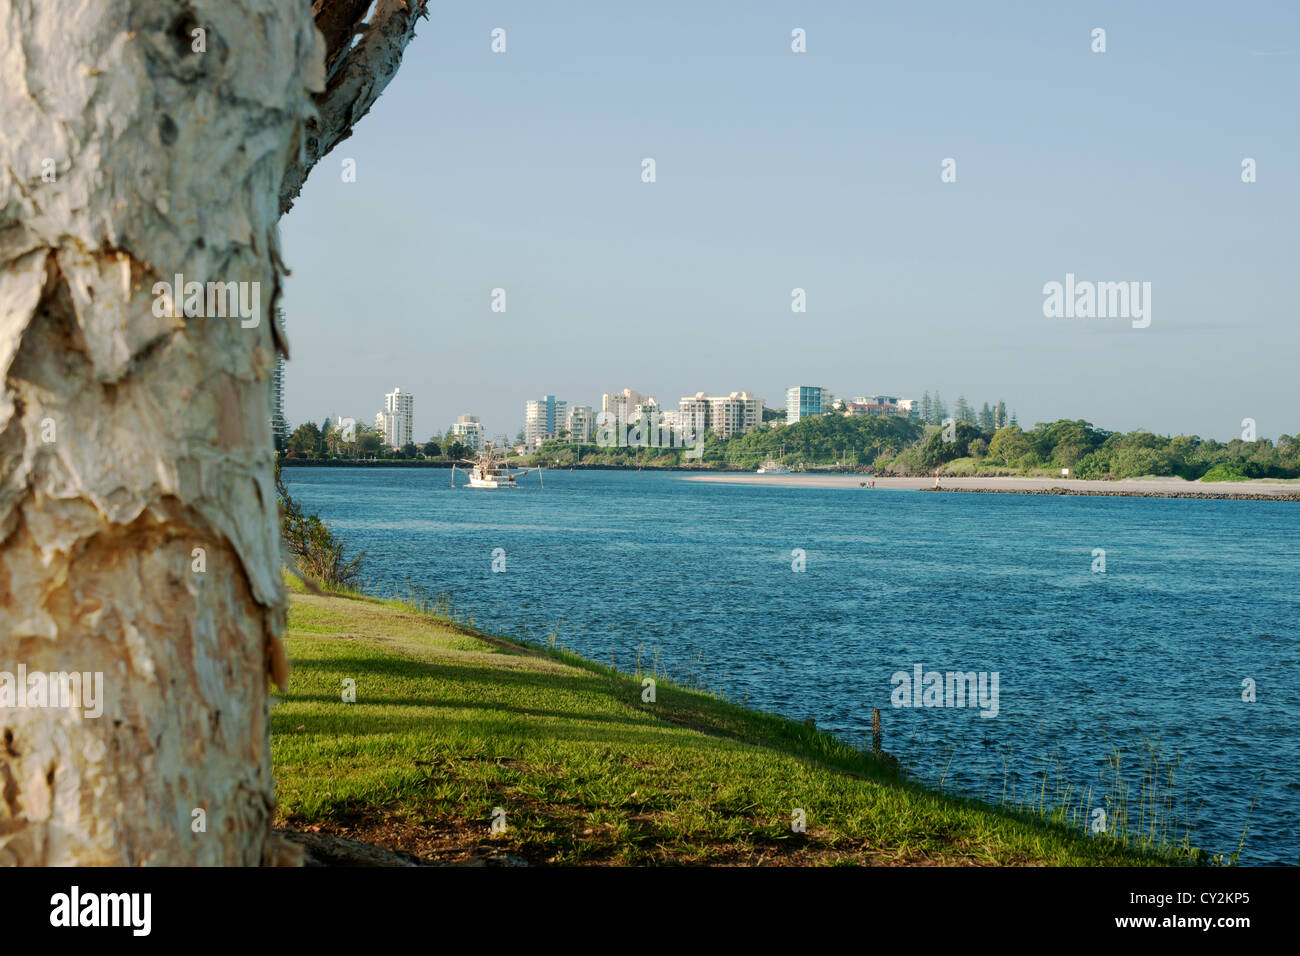 Tweed Heads, city in distance along the river. Stock Photo